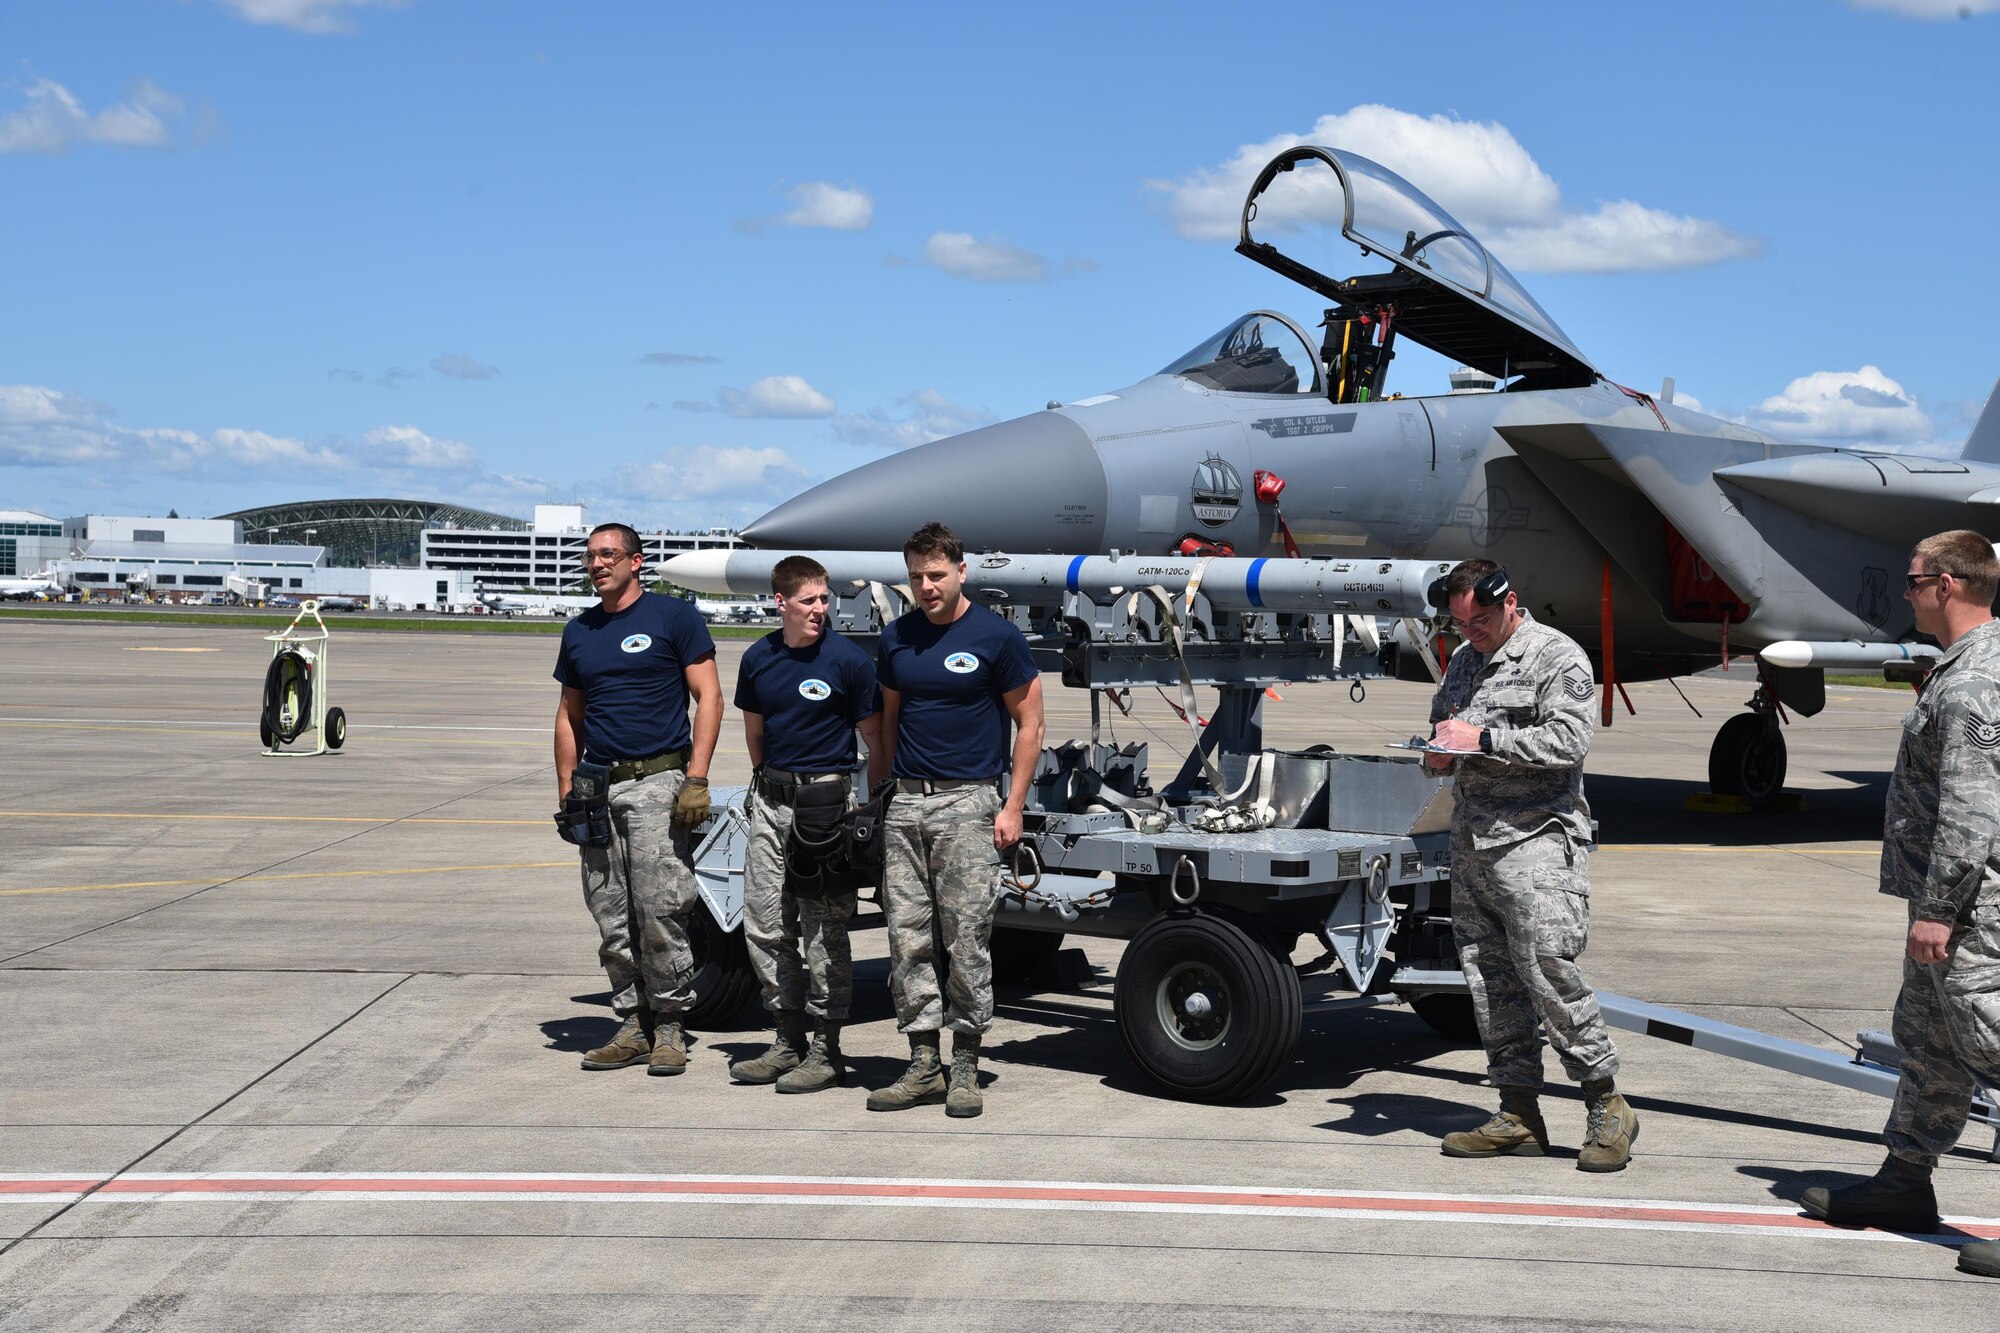 Oregon Air National Guard’s 142nd Aircraft Maintenance Squadron, aircraft armament ordinance journeymen, participate in a F-15 Eagle weapons load contest to see which team can properly and safely load six missiles onto three separate aircraft, May 7, 2017, Portland Air National Guard Base, Ore. (U.S. Air National Guard photo by Tech. Sgt. Aaron Perkins, 142nd Fighter Wing Public Affairs)